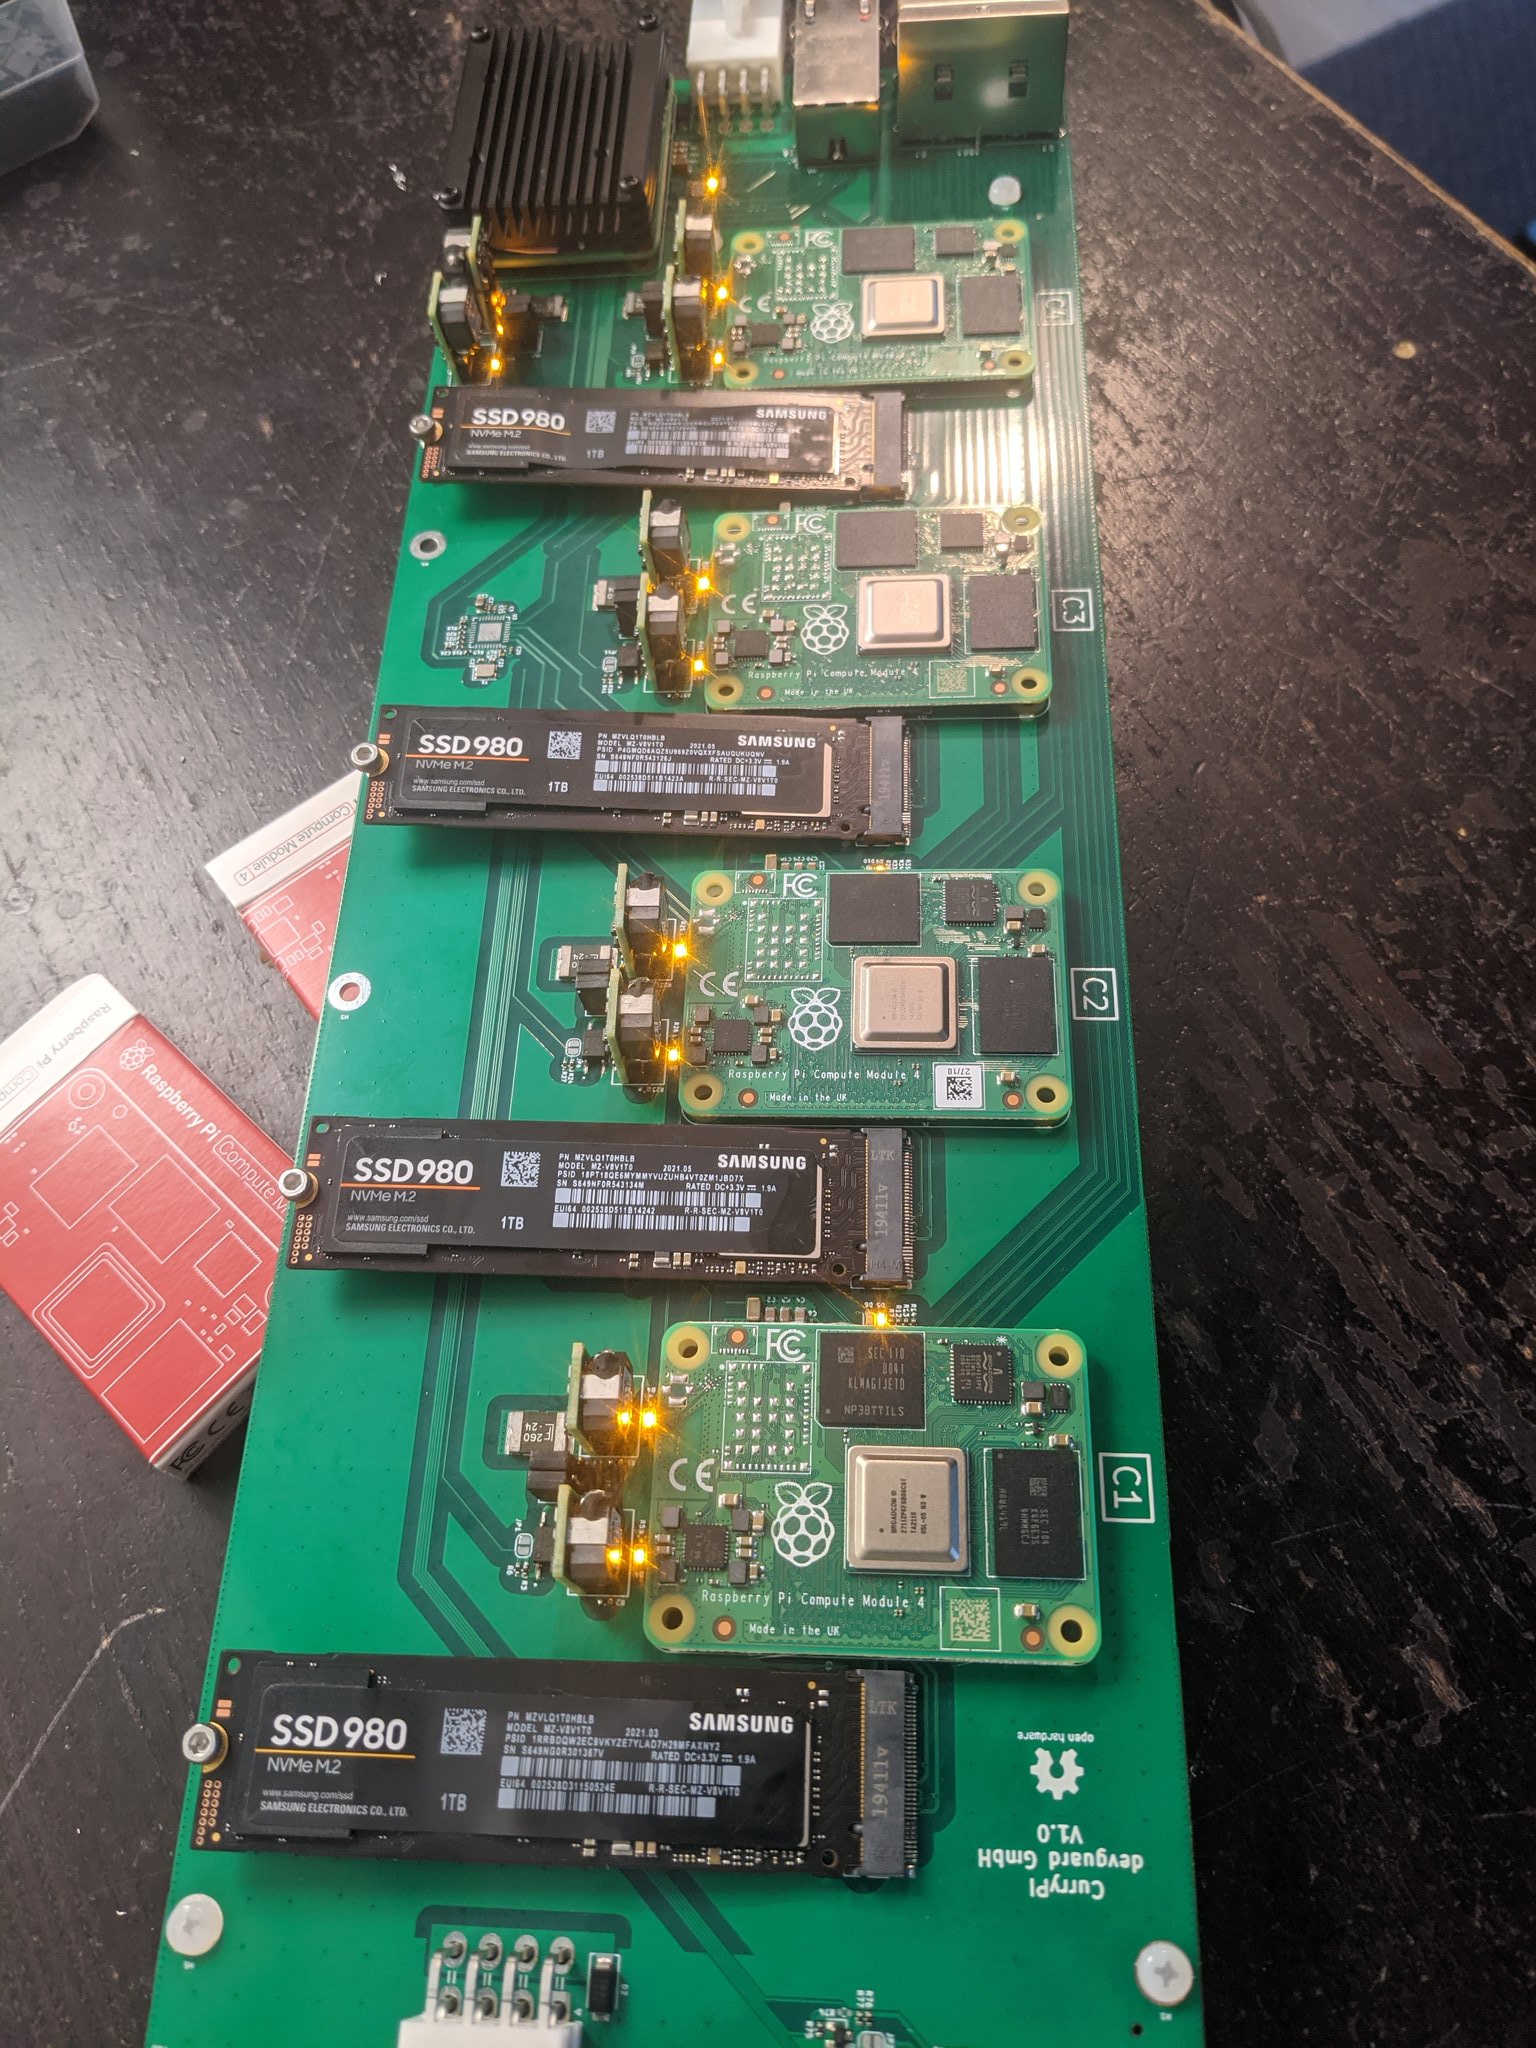 CurryPi CM4 Cluster Board